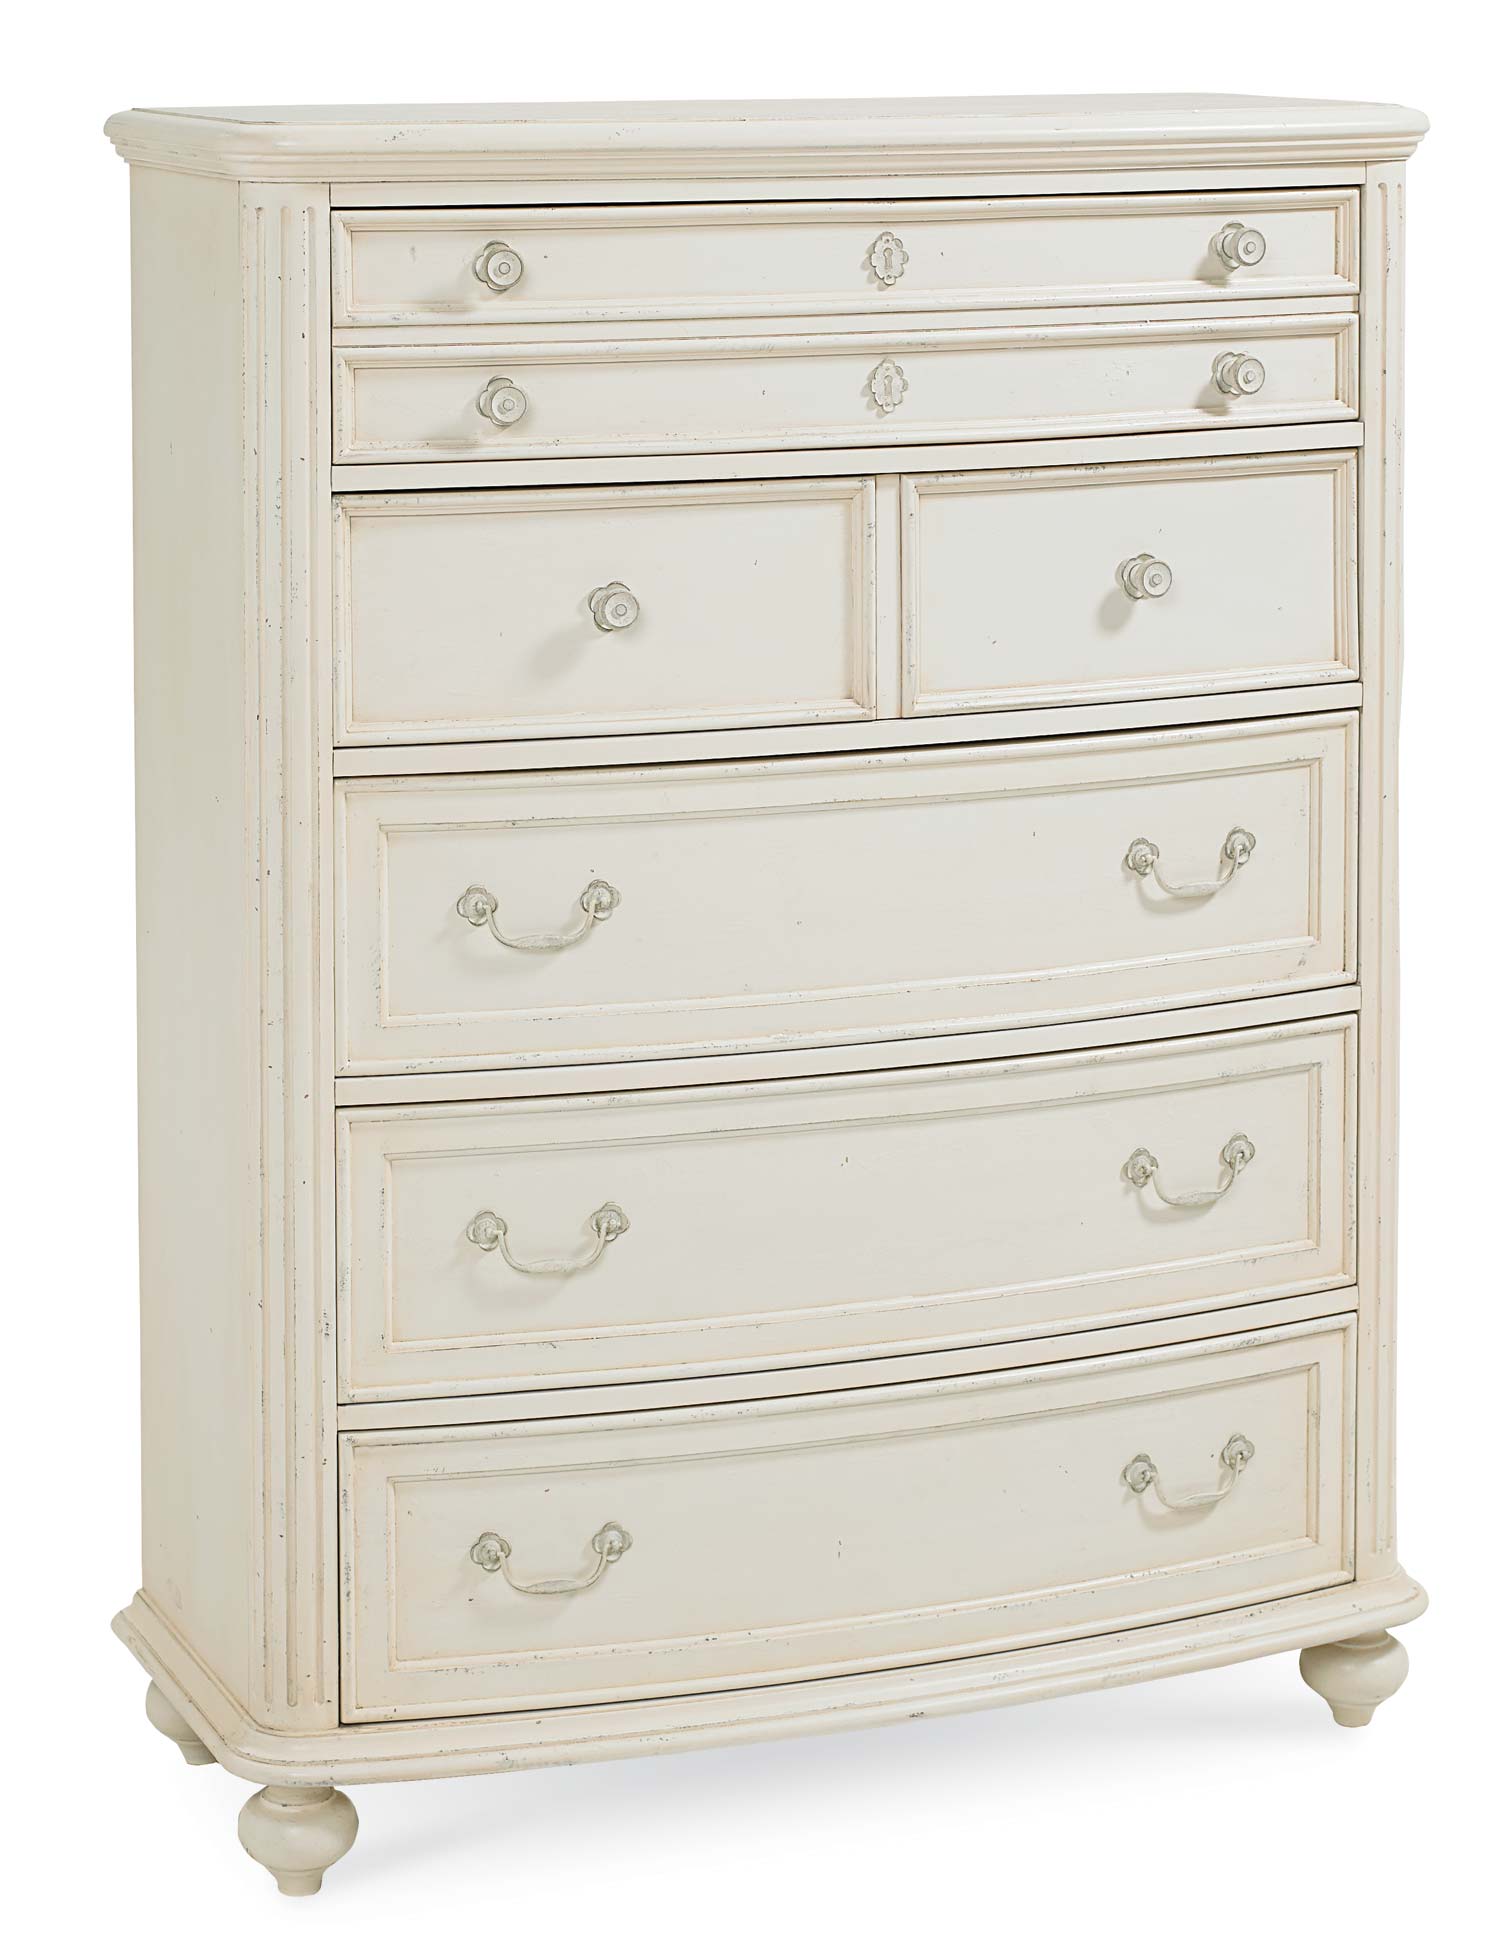 Legacy Classic Haven Drawer Chest - Buttercream White/Slight Distressing